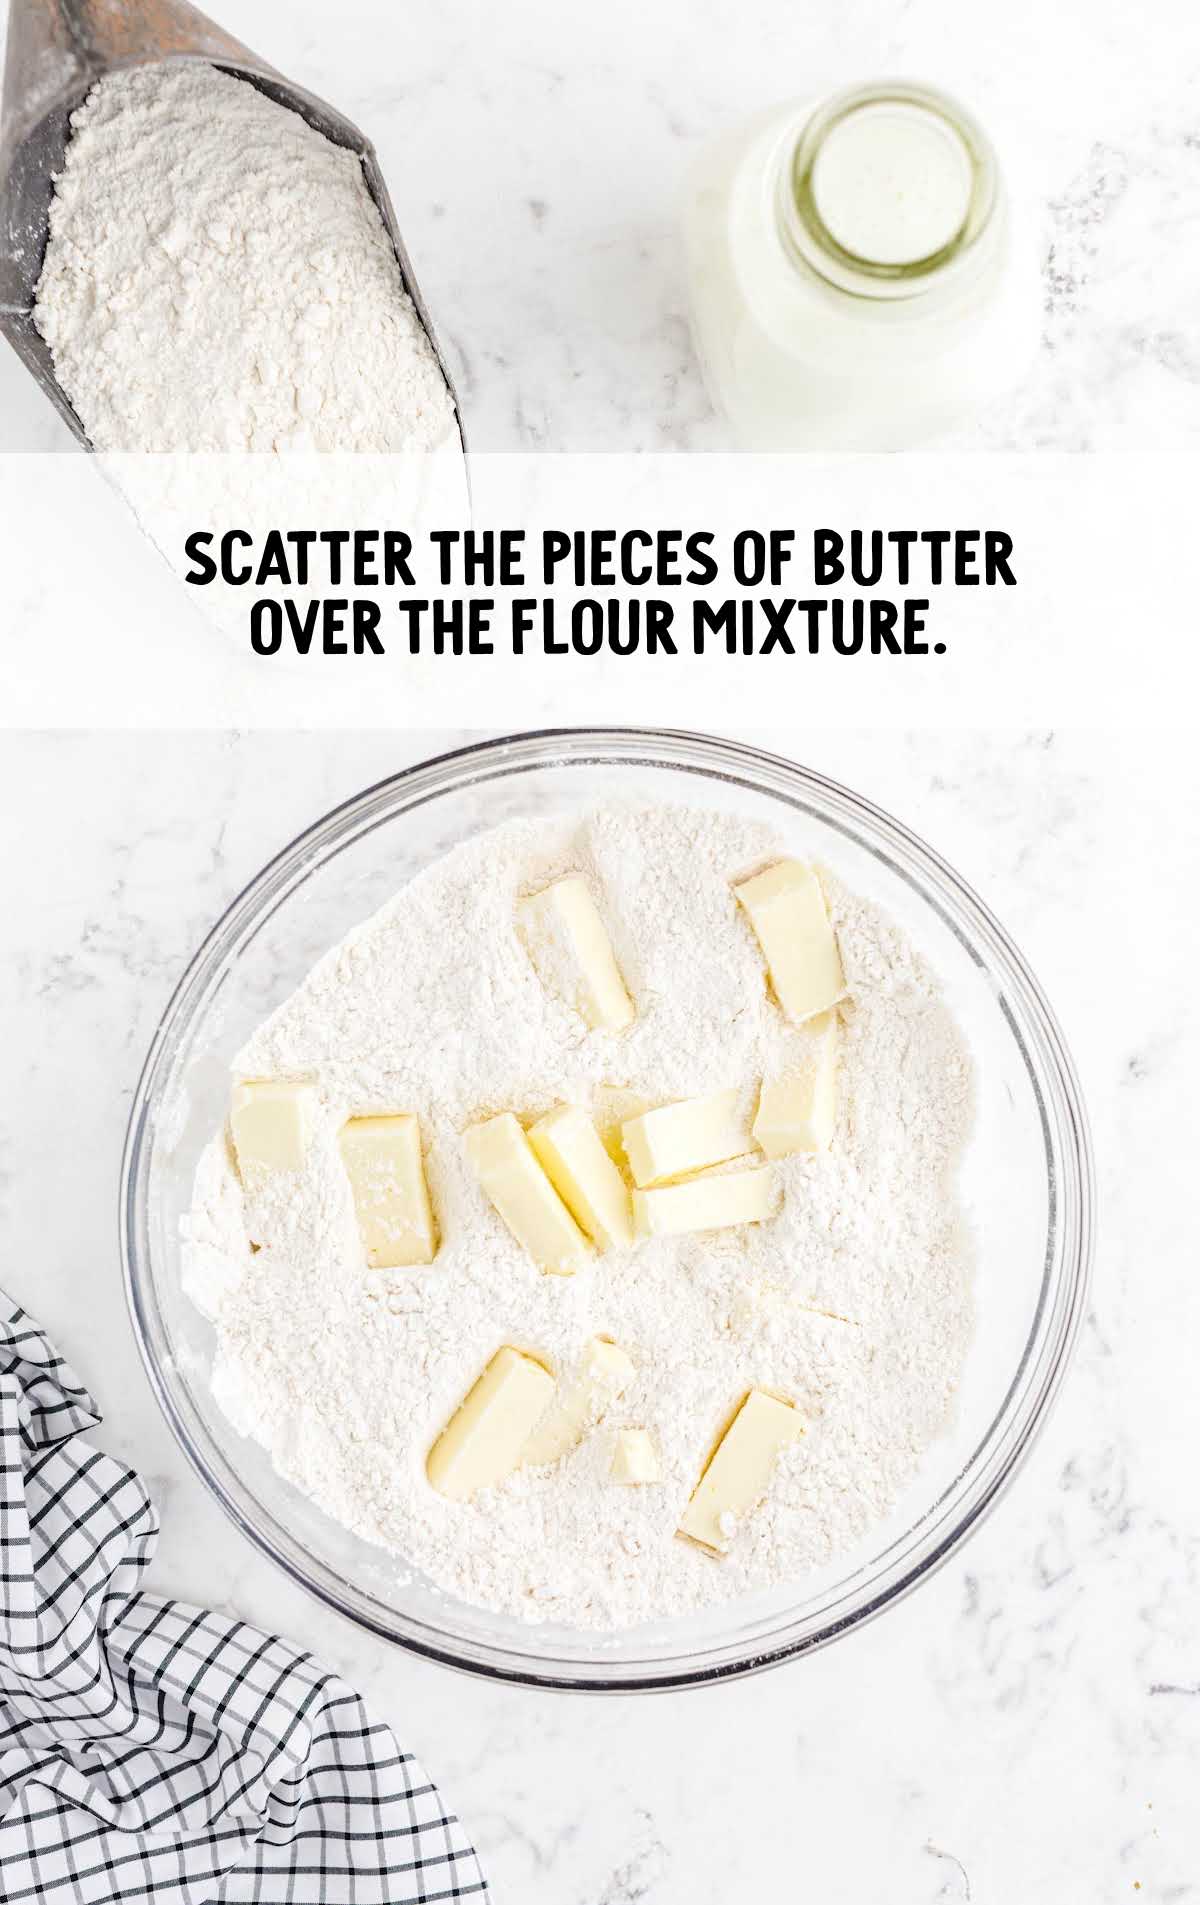 pieces of butter added to the flour mixture in a bowl